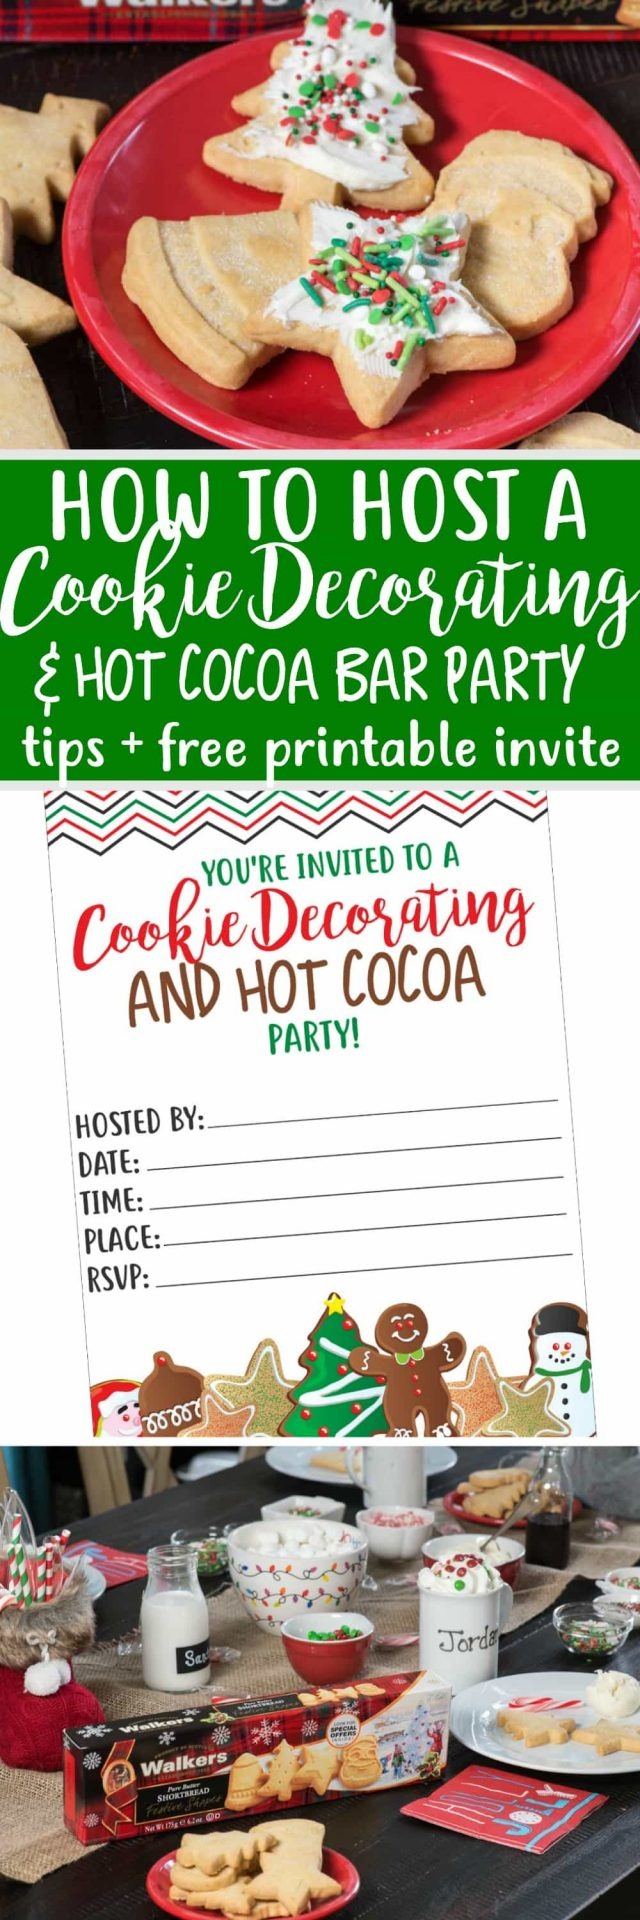 How To Host A Cookie Decorating Party For Kids - Crazy For Crust - Free Printable Cookie Decorating Invitations